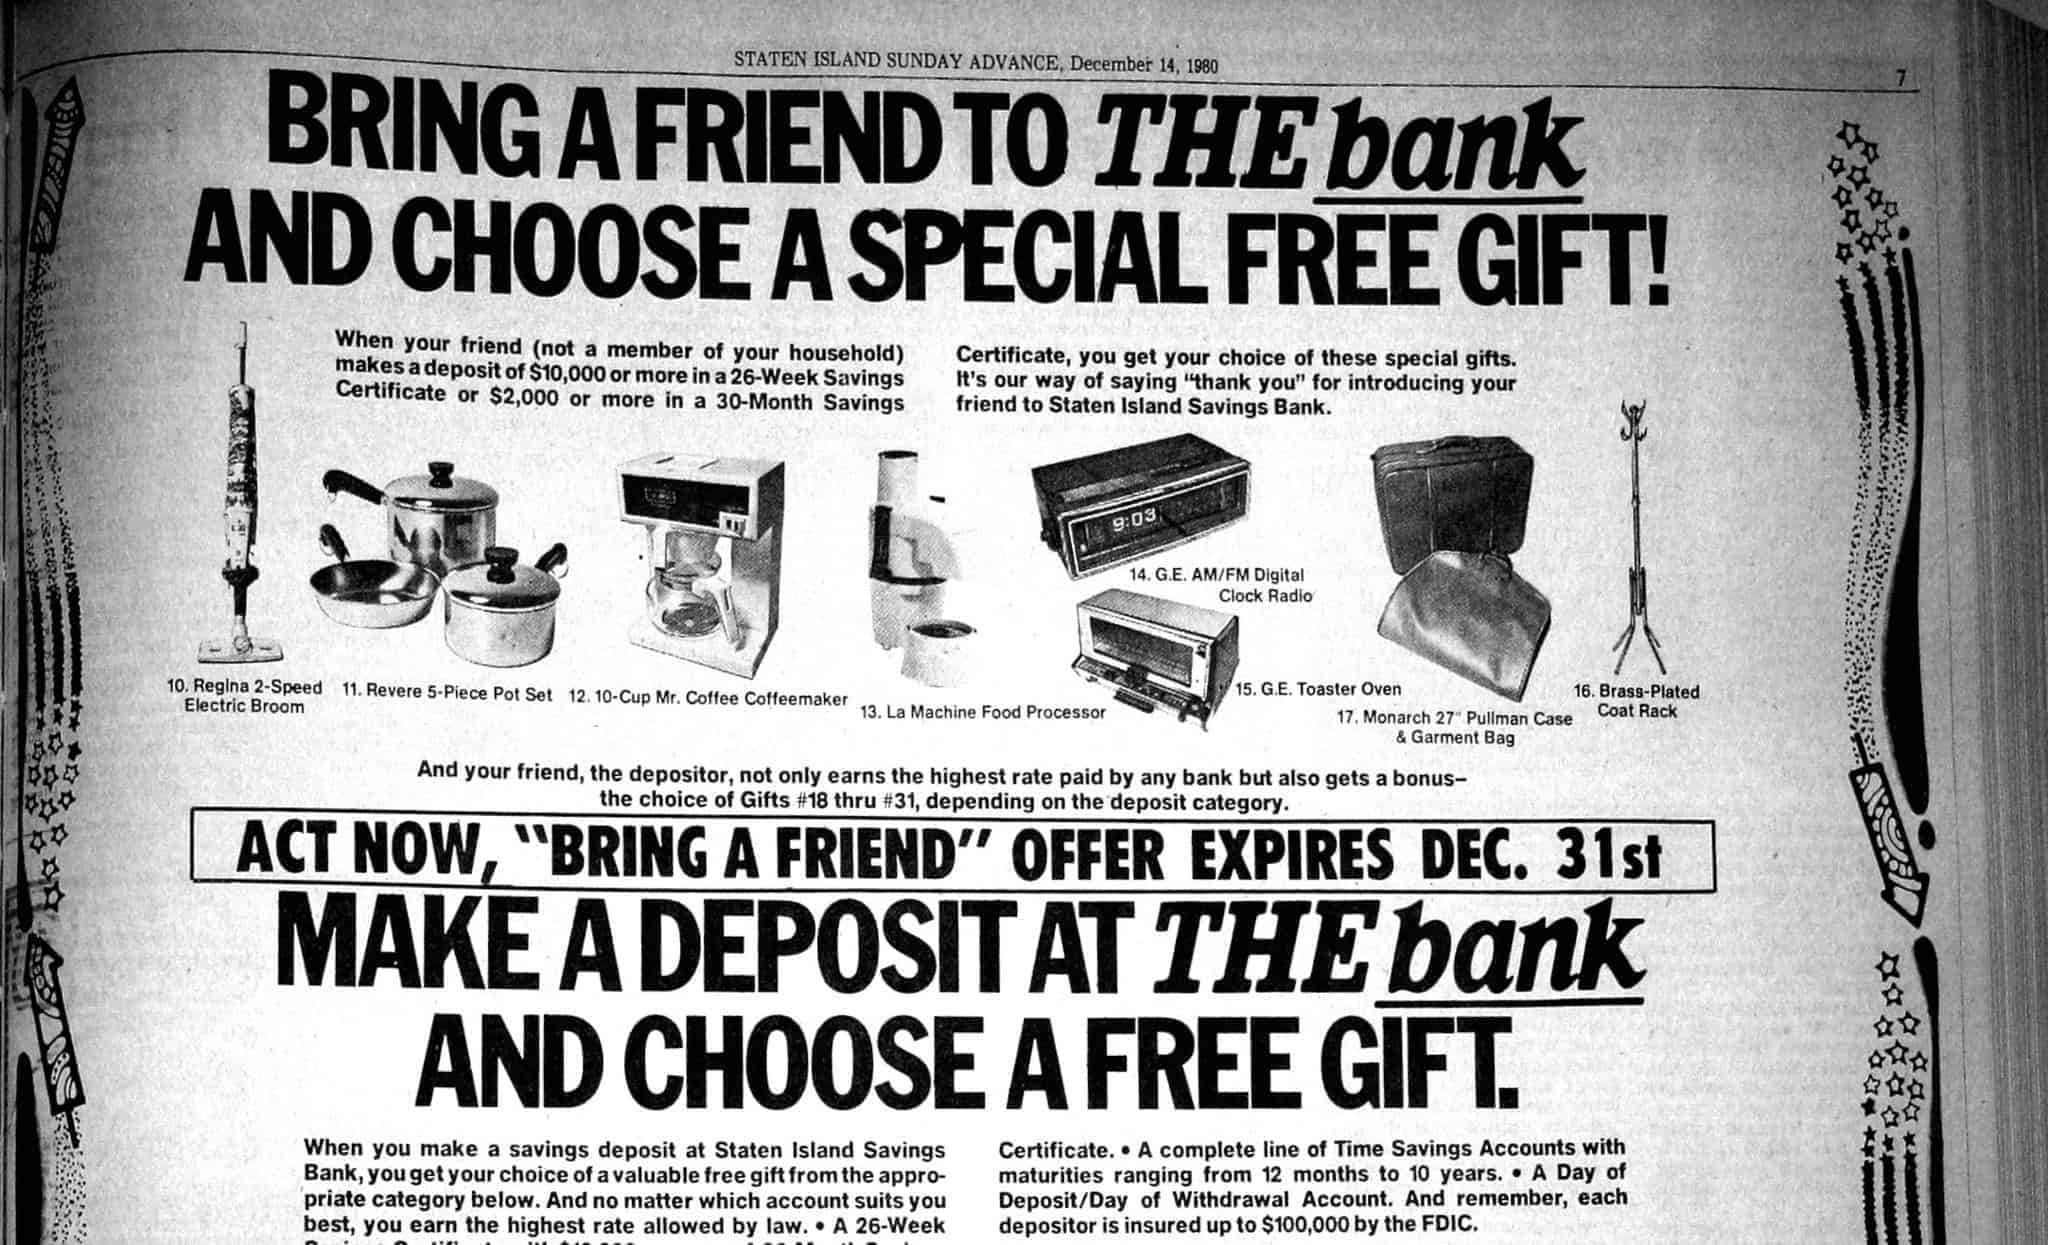 Advertisement in the December 14, 1980 edition of the Staten Island Advance for a bank offering gifts for bringing a friend to open a new account